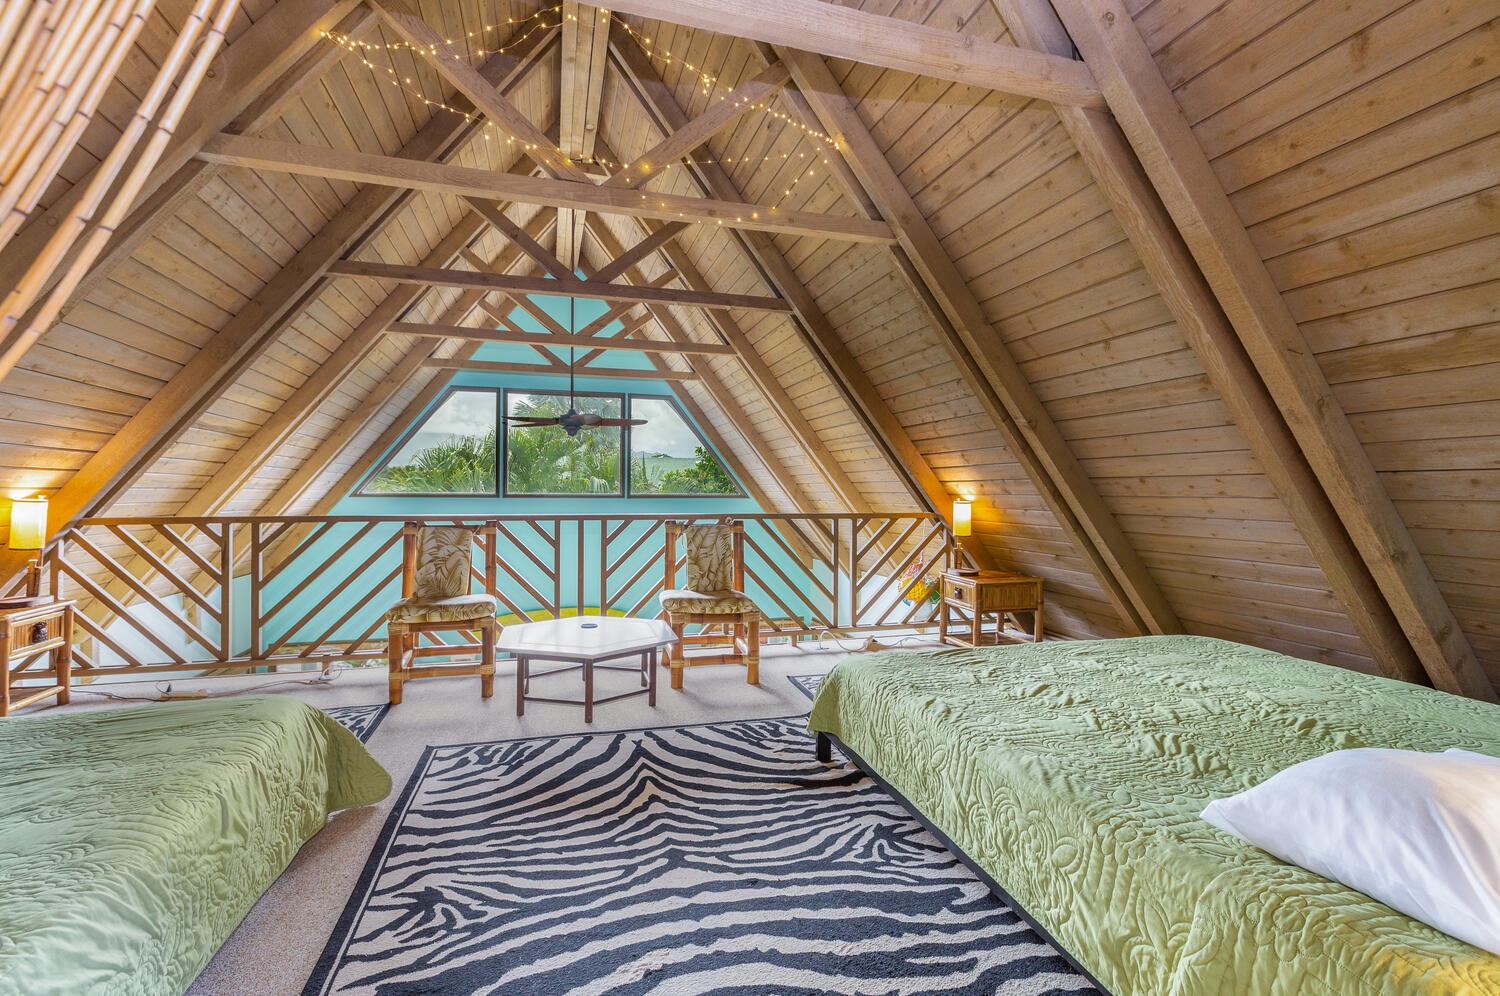 Princeville Vacation Rentals, Ailana Hale - Two king size beds in the loft area